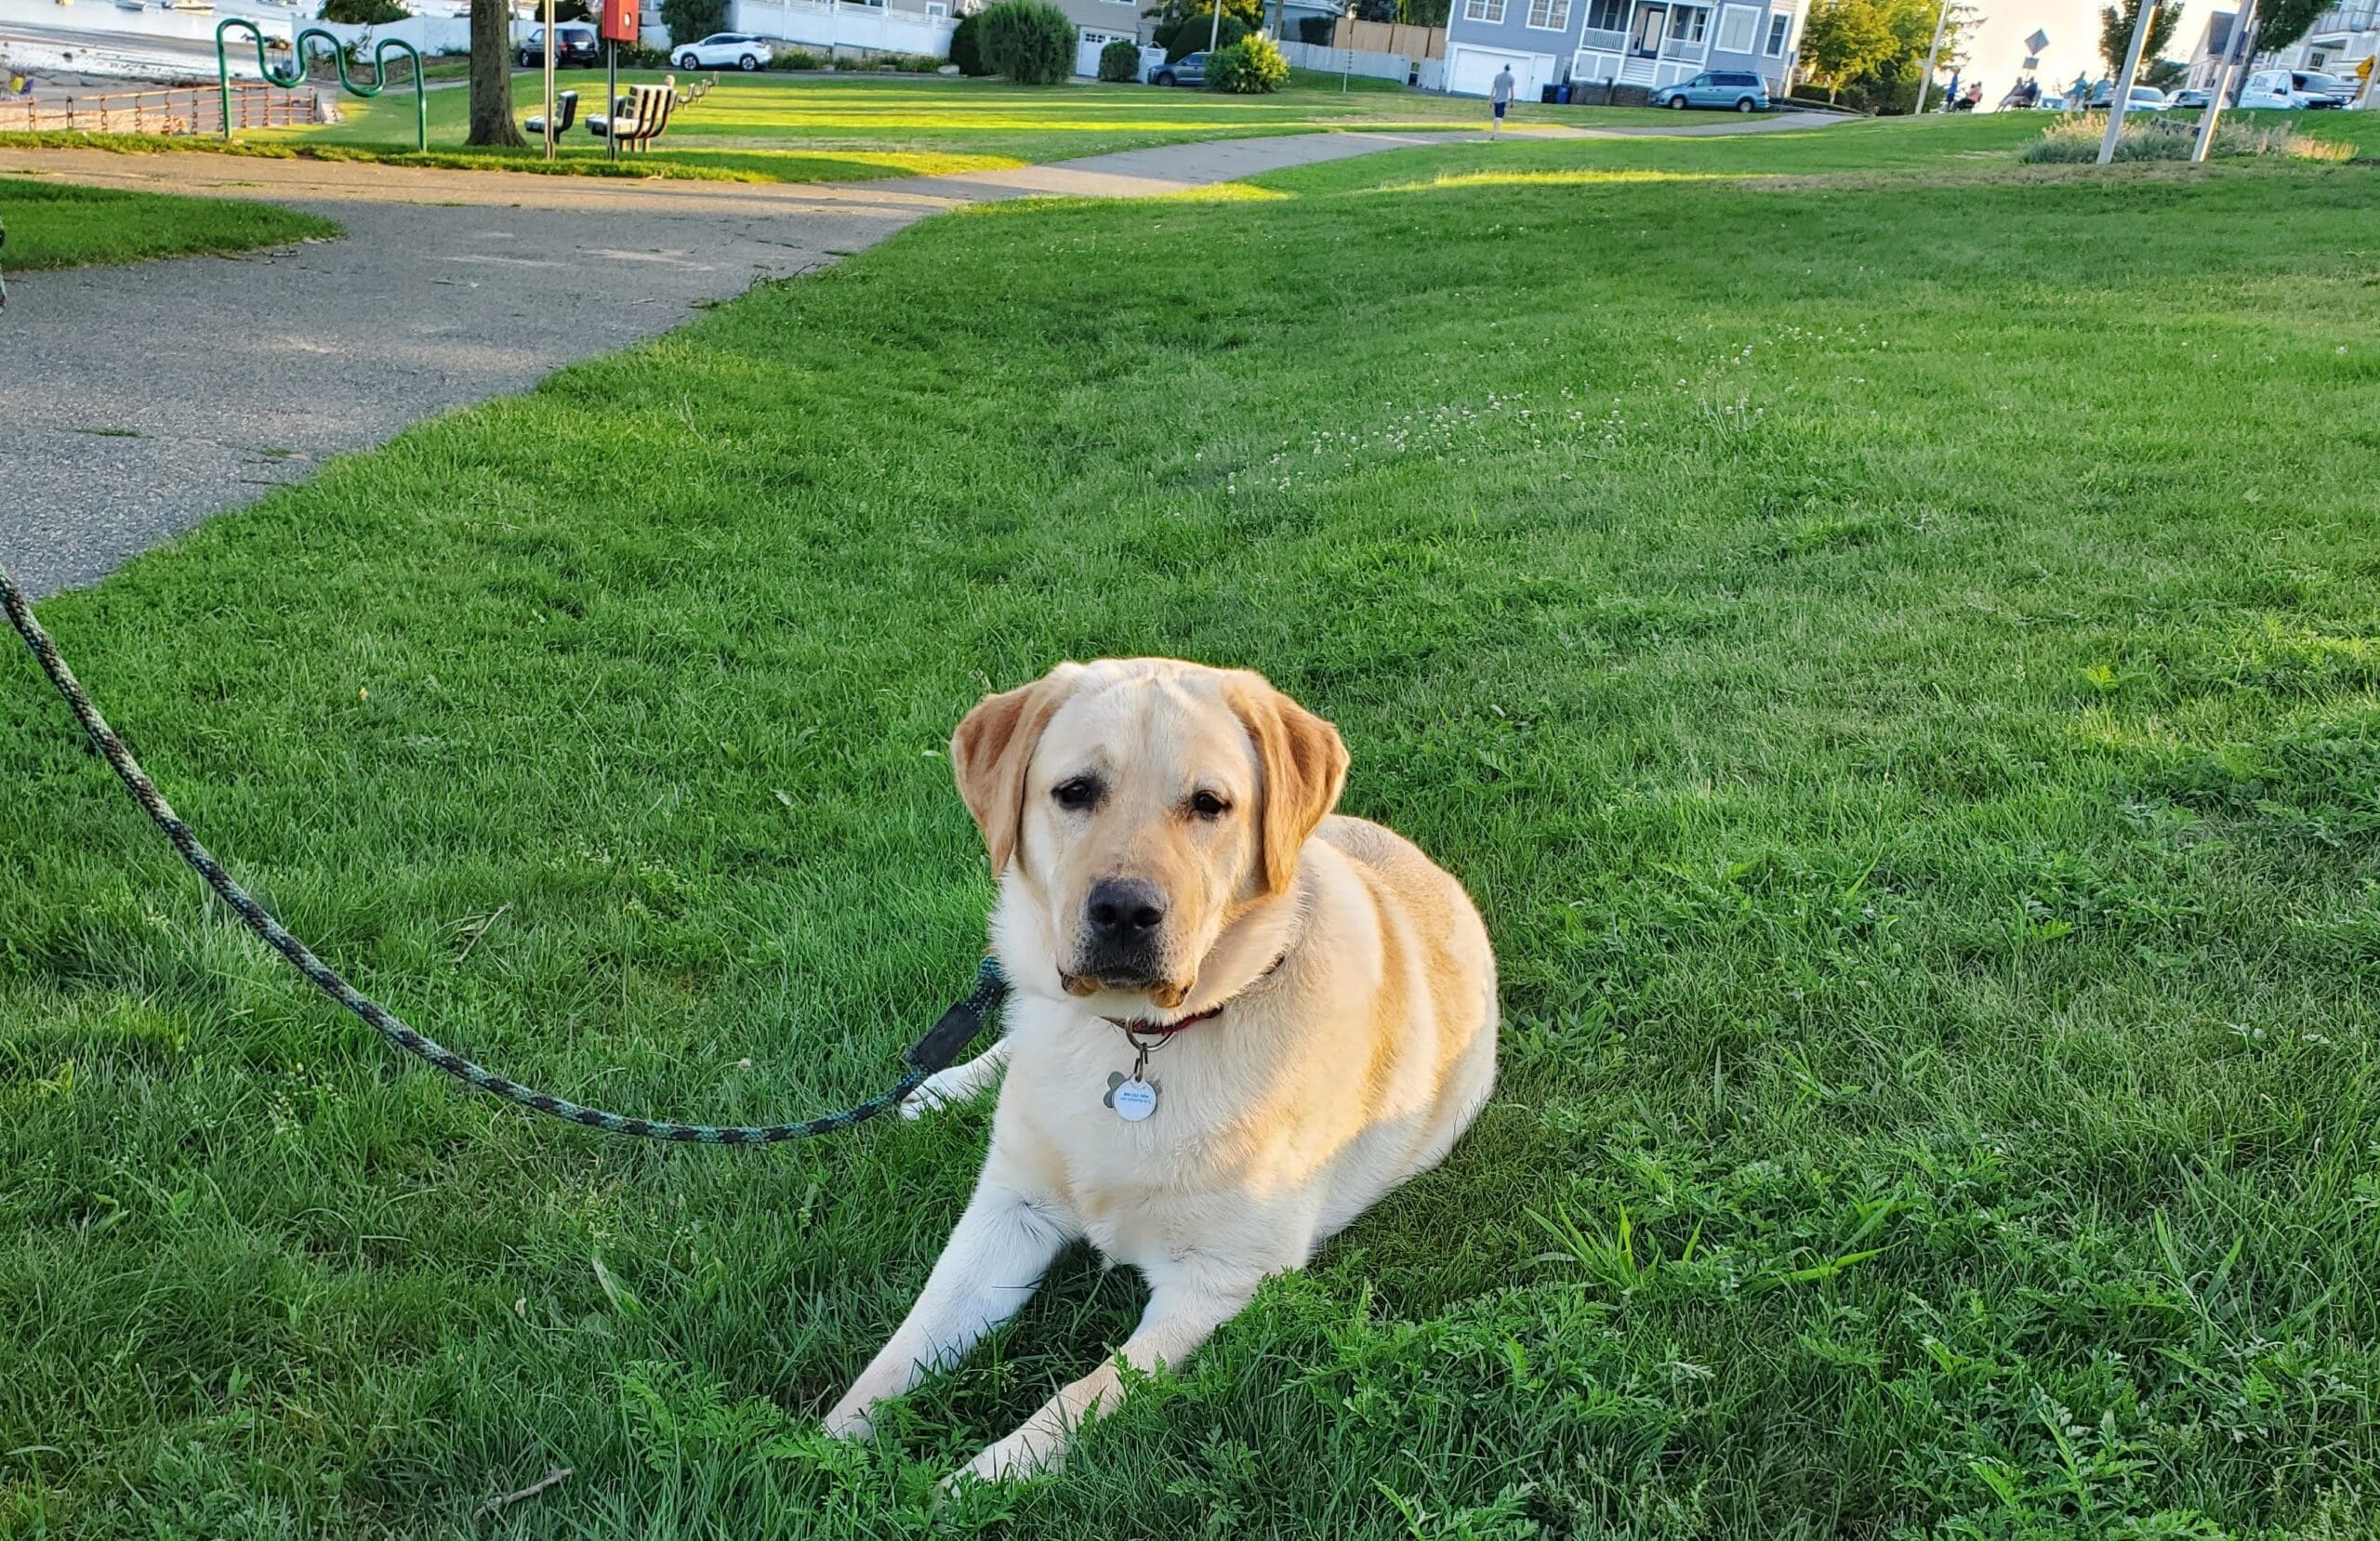 yellow lab on leash during dog training at park